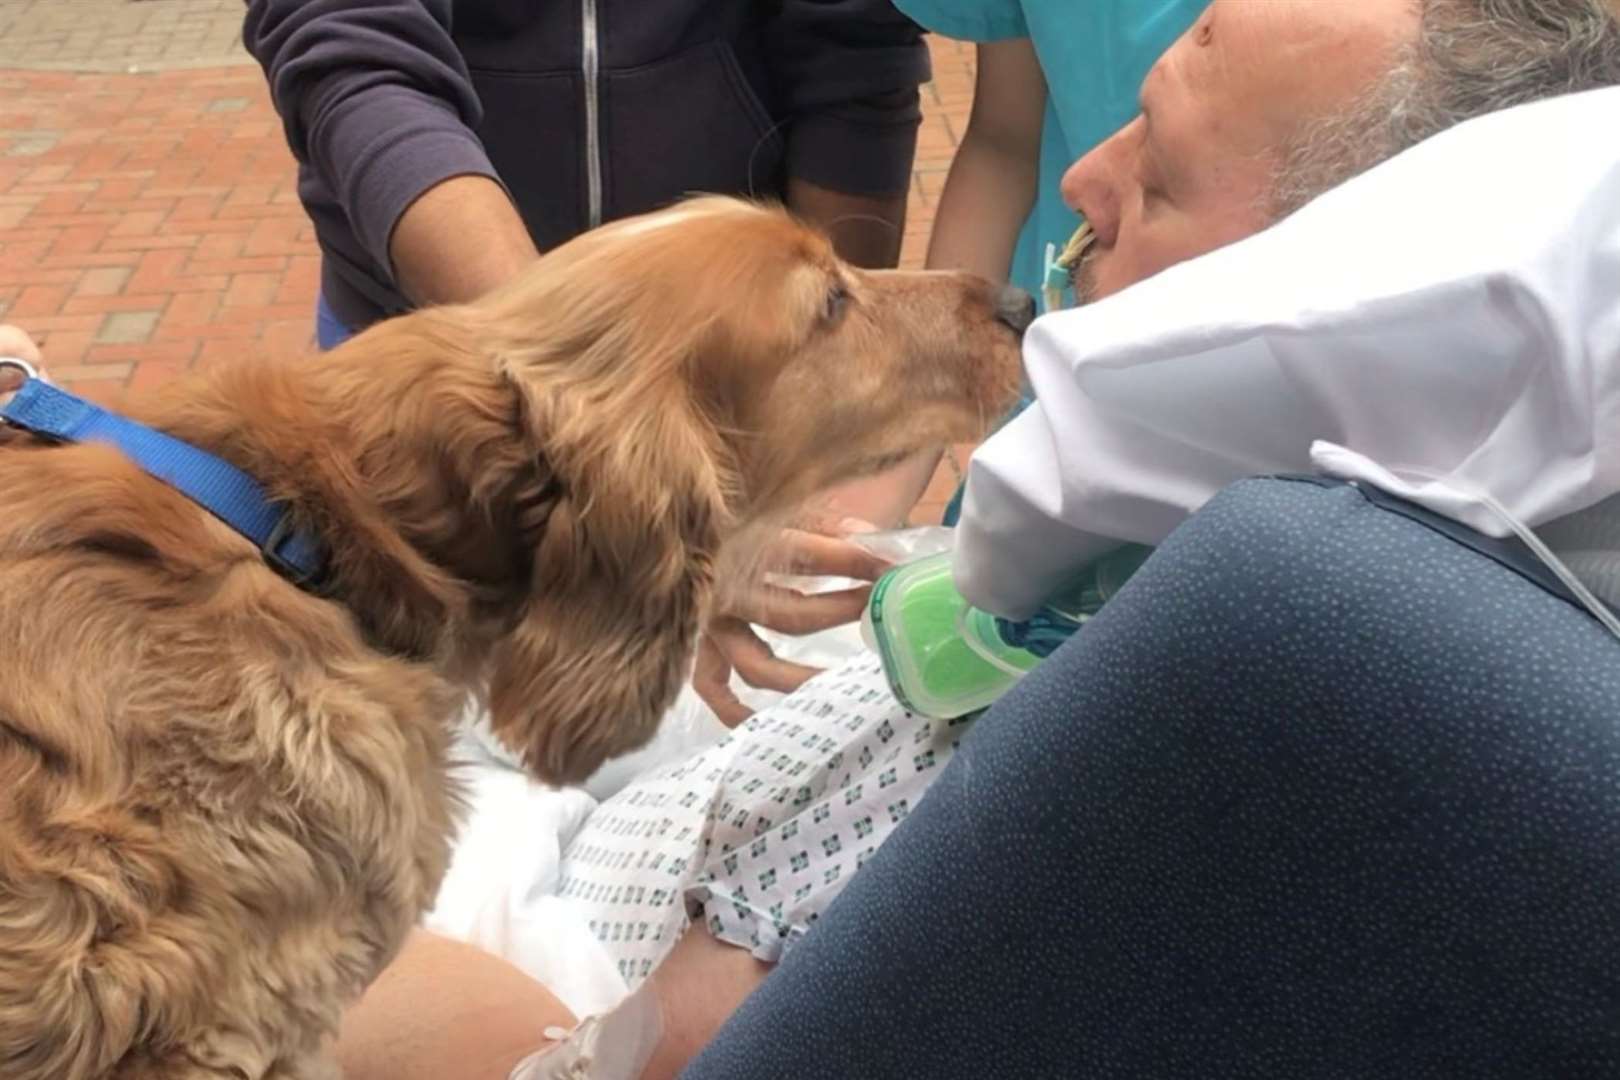 The moment Jim was reunited with his precious pup